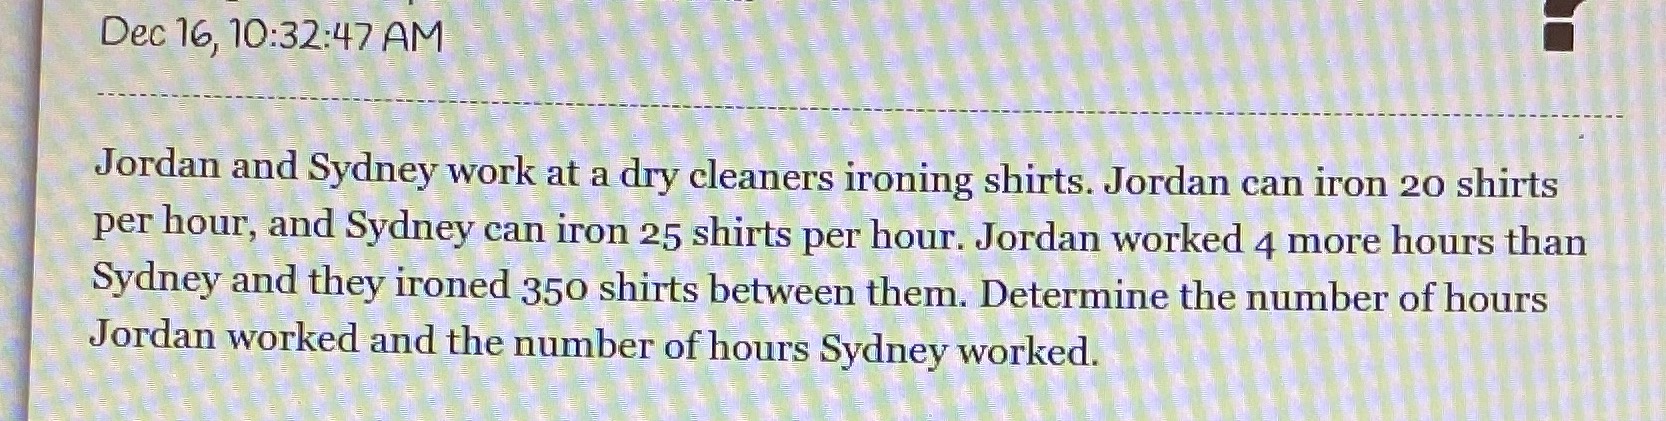 Jordan and Sydney work at a dry cleaners ironing s...